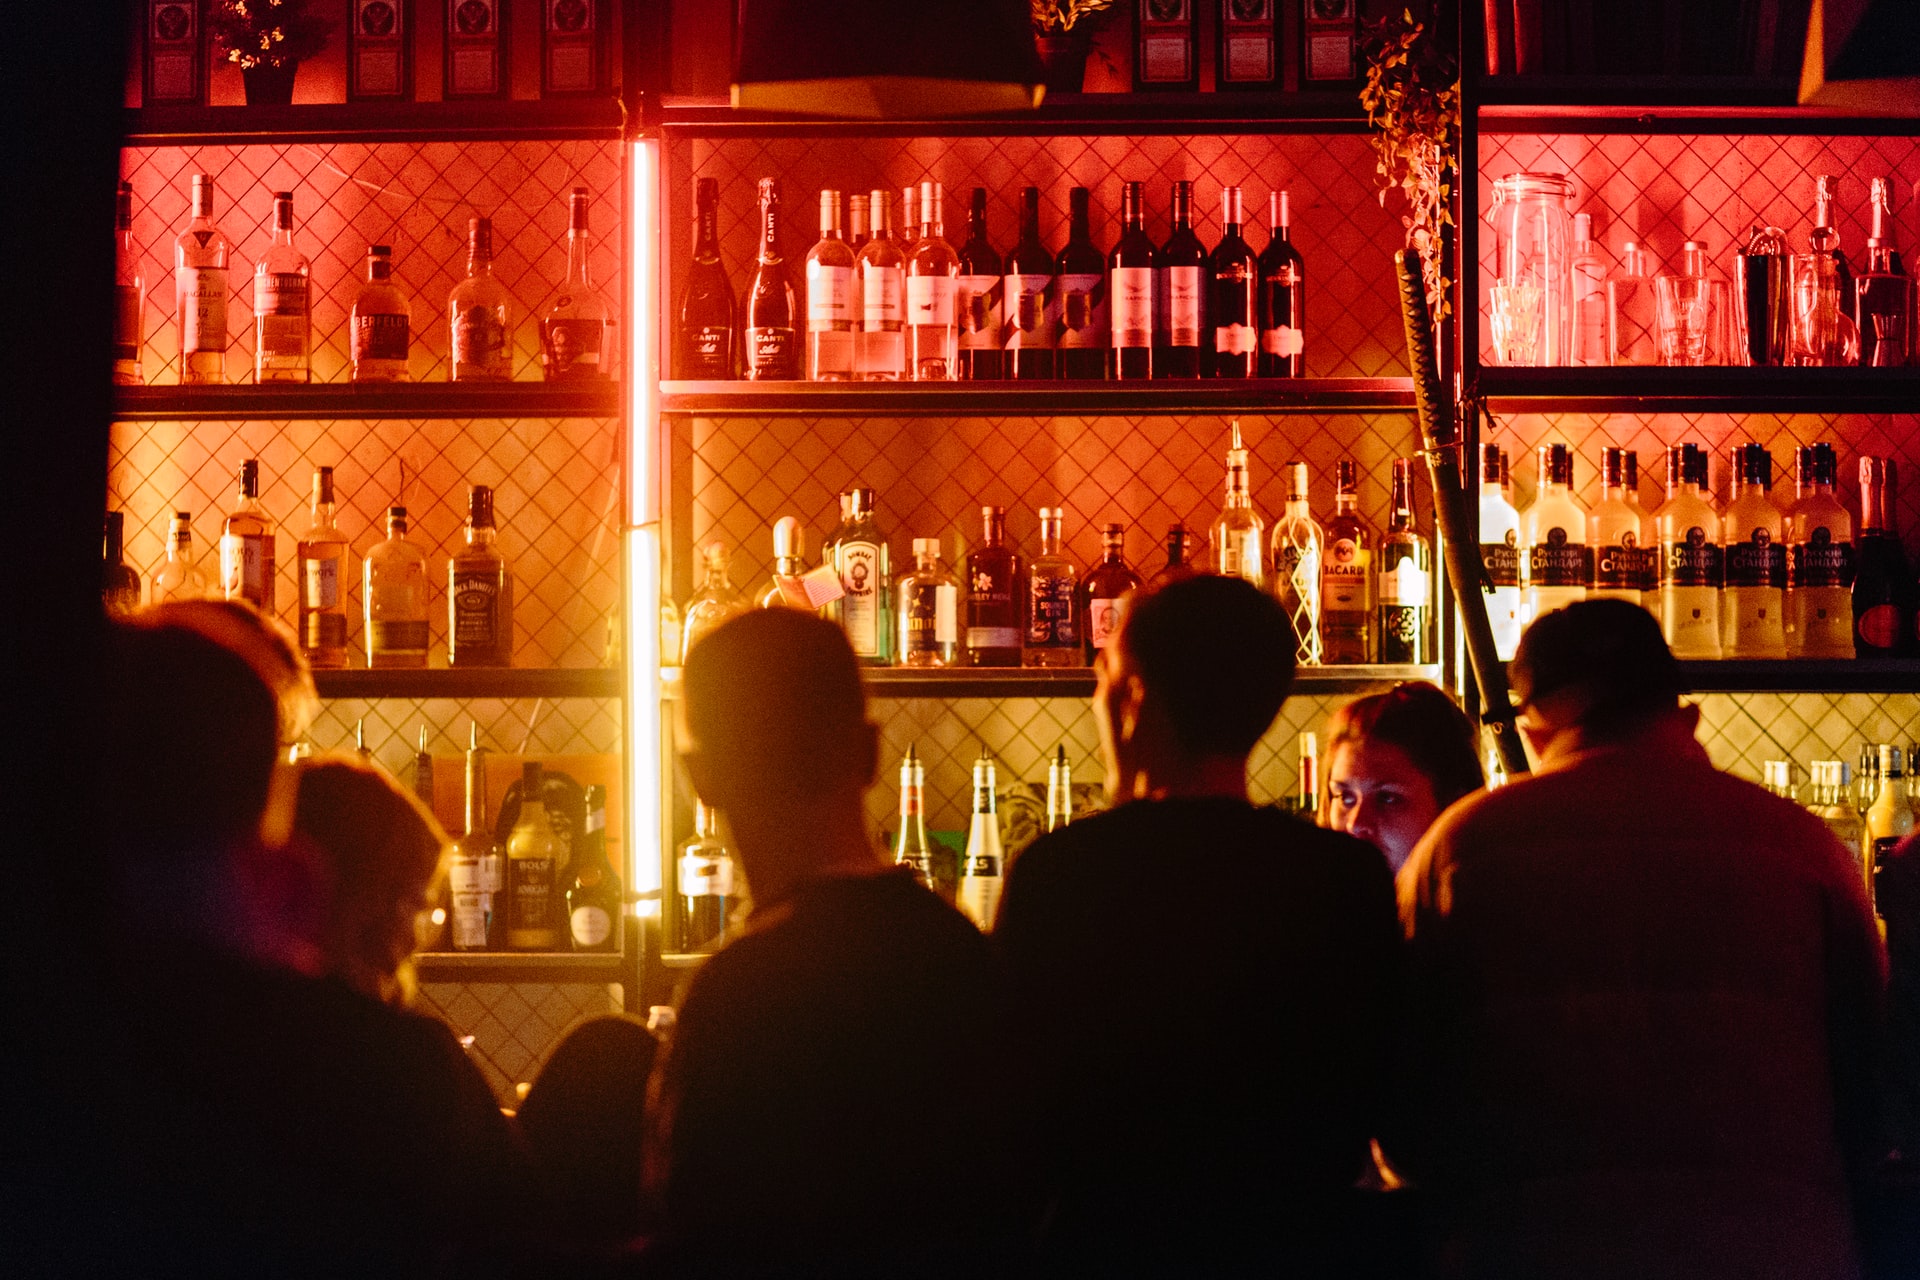 The Best Areas to Stay for Nightlife